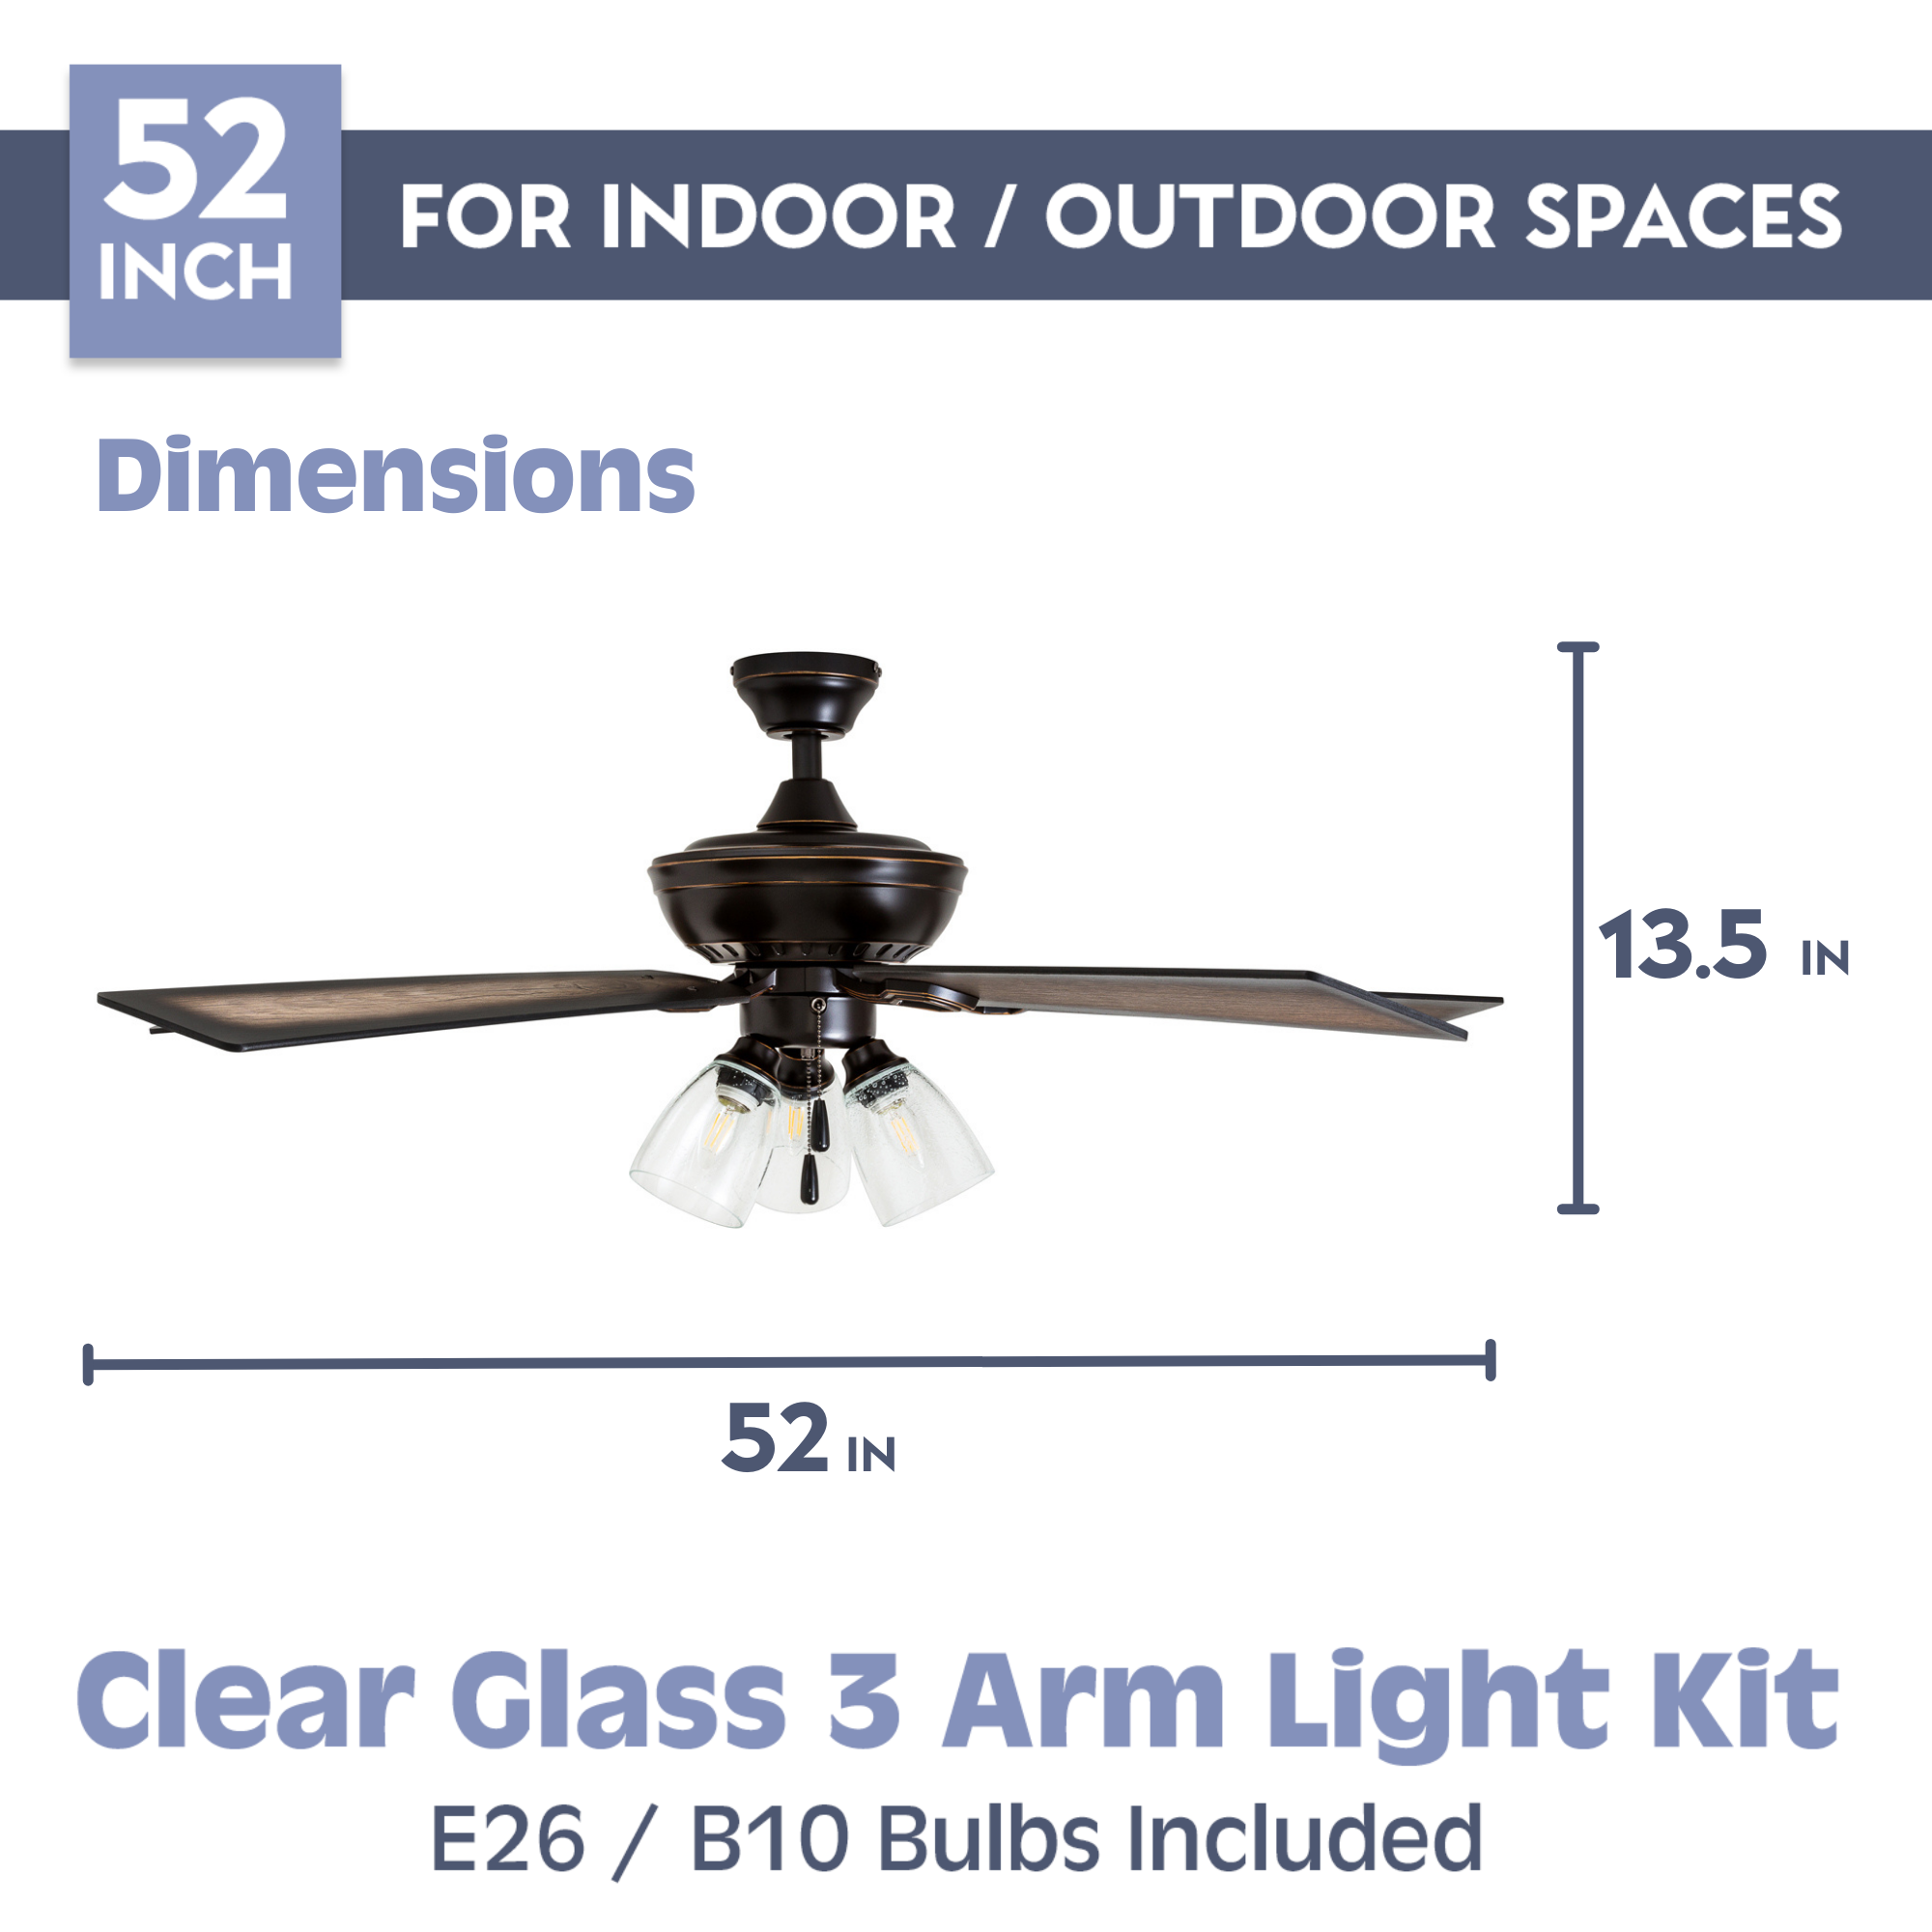 52 Inch Glenmont, Oil Rubbed Bronze, Pull Chain, Ceiling Fan by Prominence Home